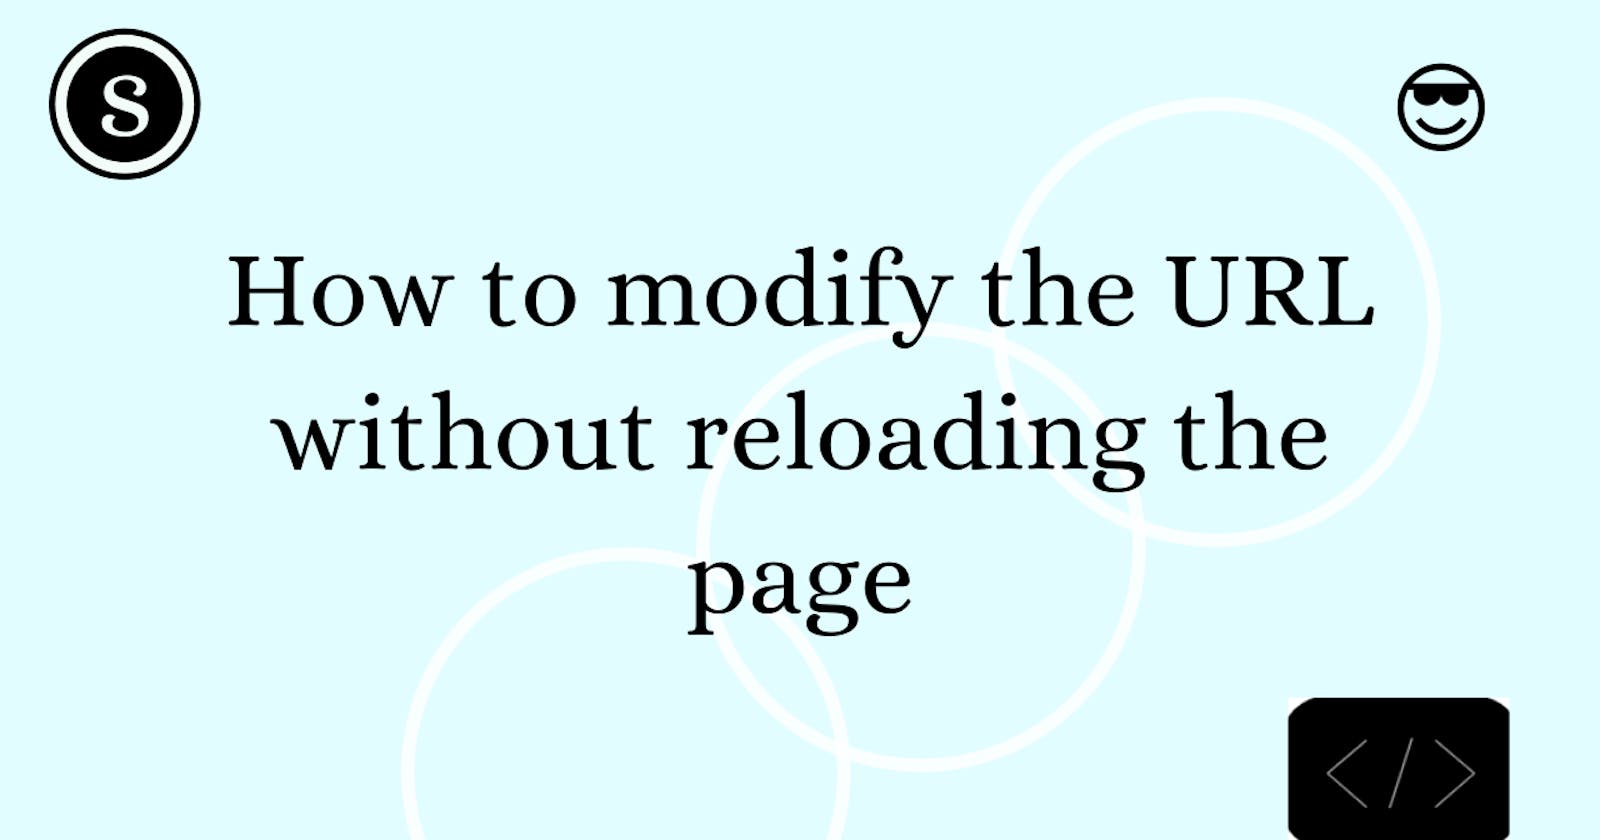 How to modify the URL without reloading the page